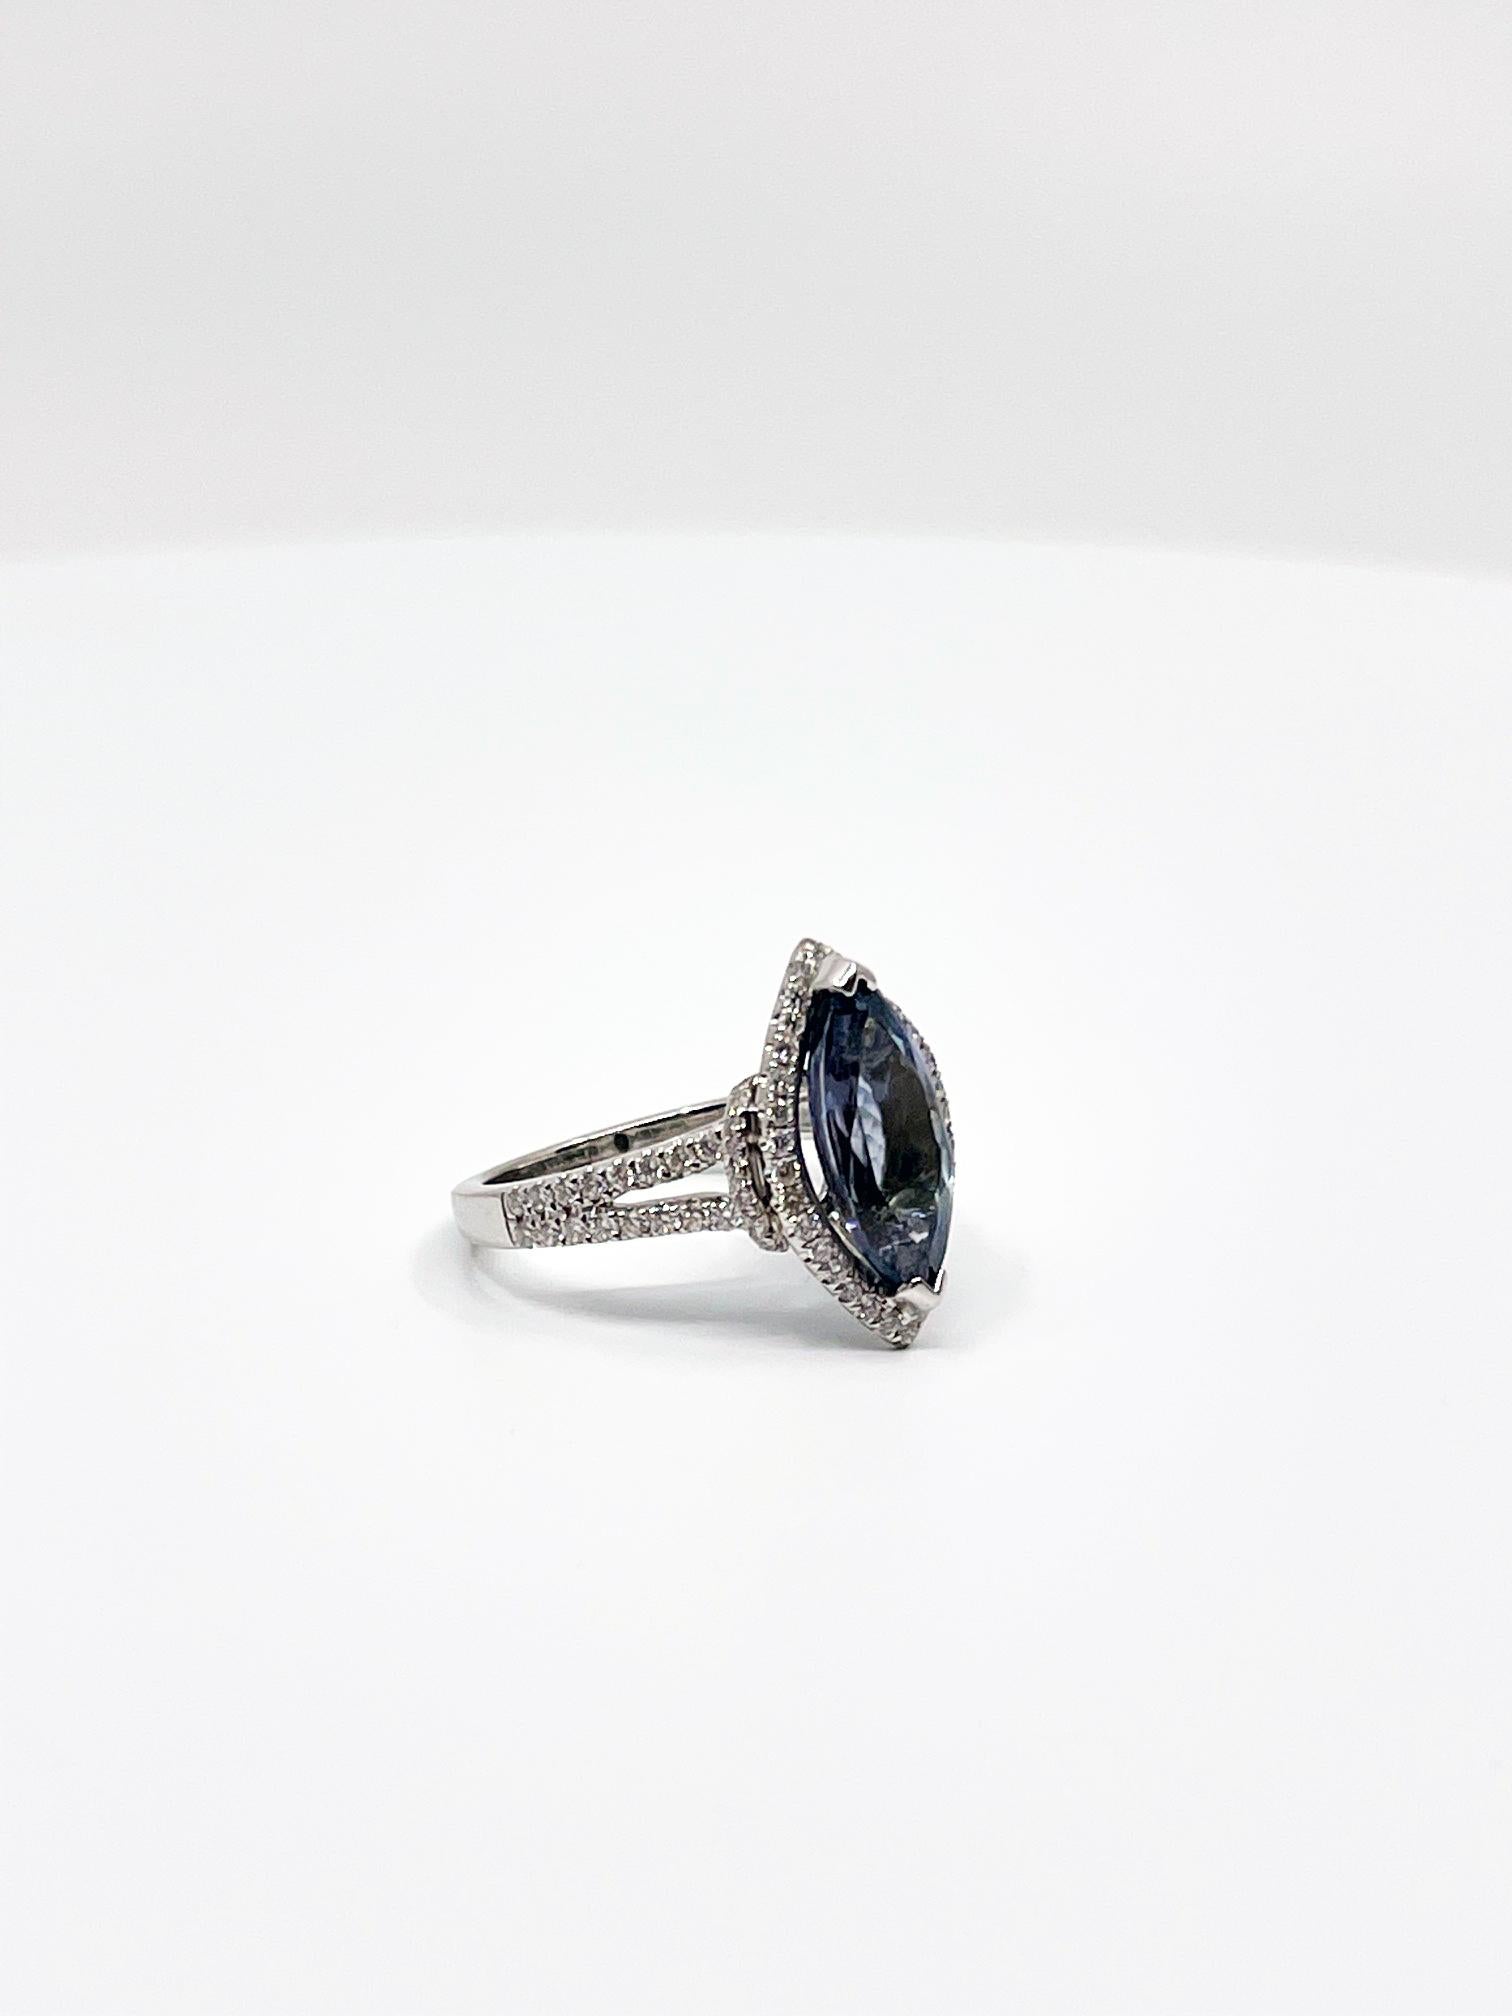 A stunning example of a 3.55ct marquise cut, eye clean tanzanite ring, surrounded by 100 brilliant cut diamonds (G/SI) set in a halo and along the band, in 18ct white gold. 